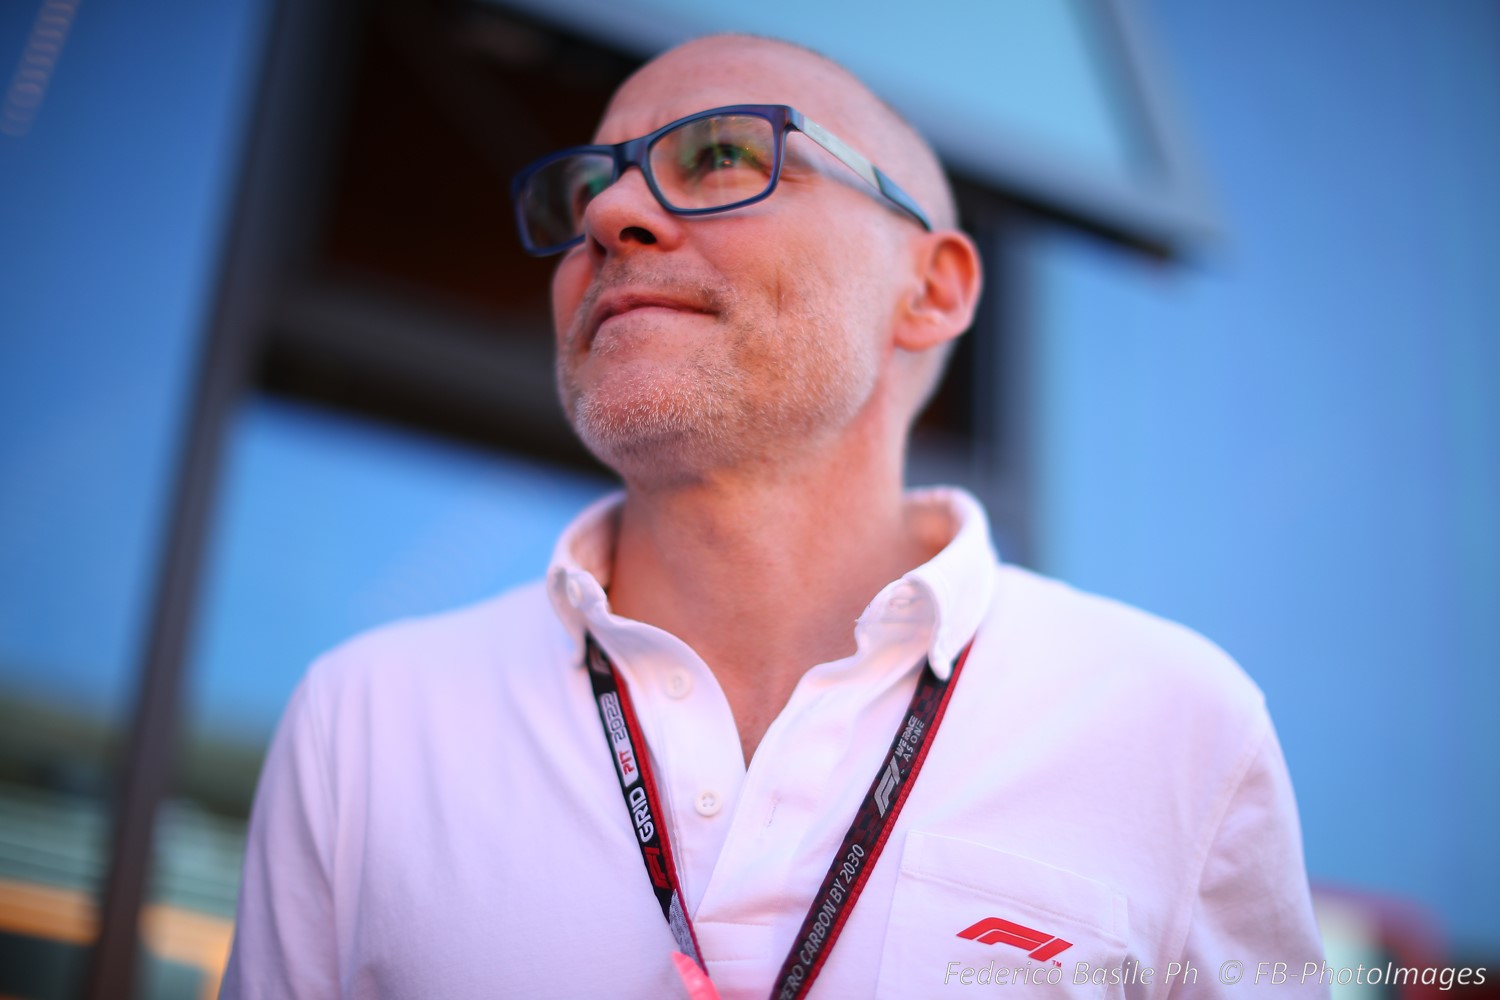 Jacques Villeneuve former driver at Sauber BMW, Williams and BAR, former IndyCar driver and winner of the Indy 500 1995, world champion 1997 with Williams Renault, now F1 TV commentator during the Italian GP, 8-11 September 2022 at Monza track, Formula 1 World championship 2022.